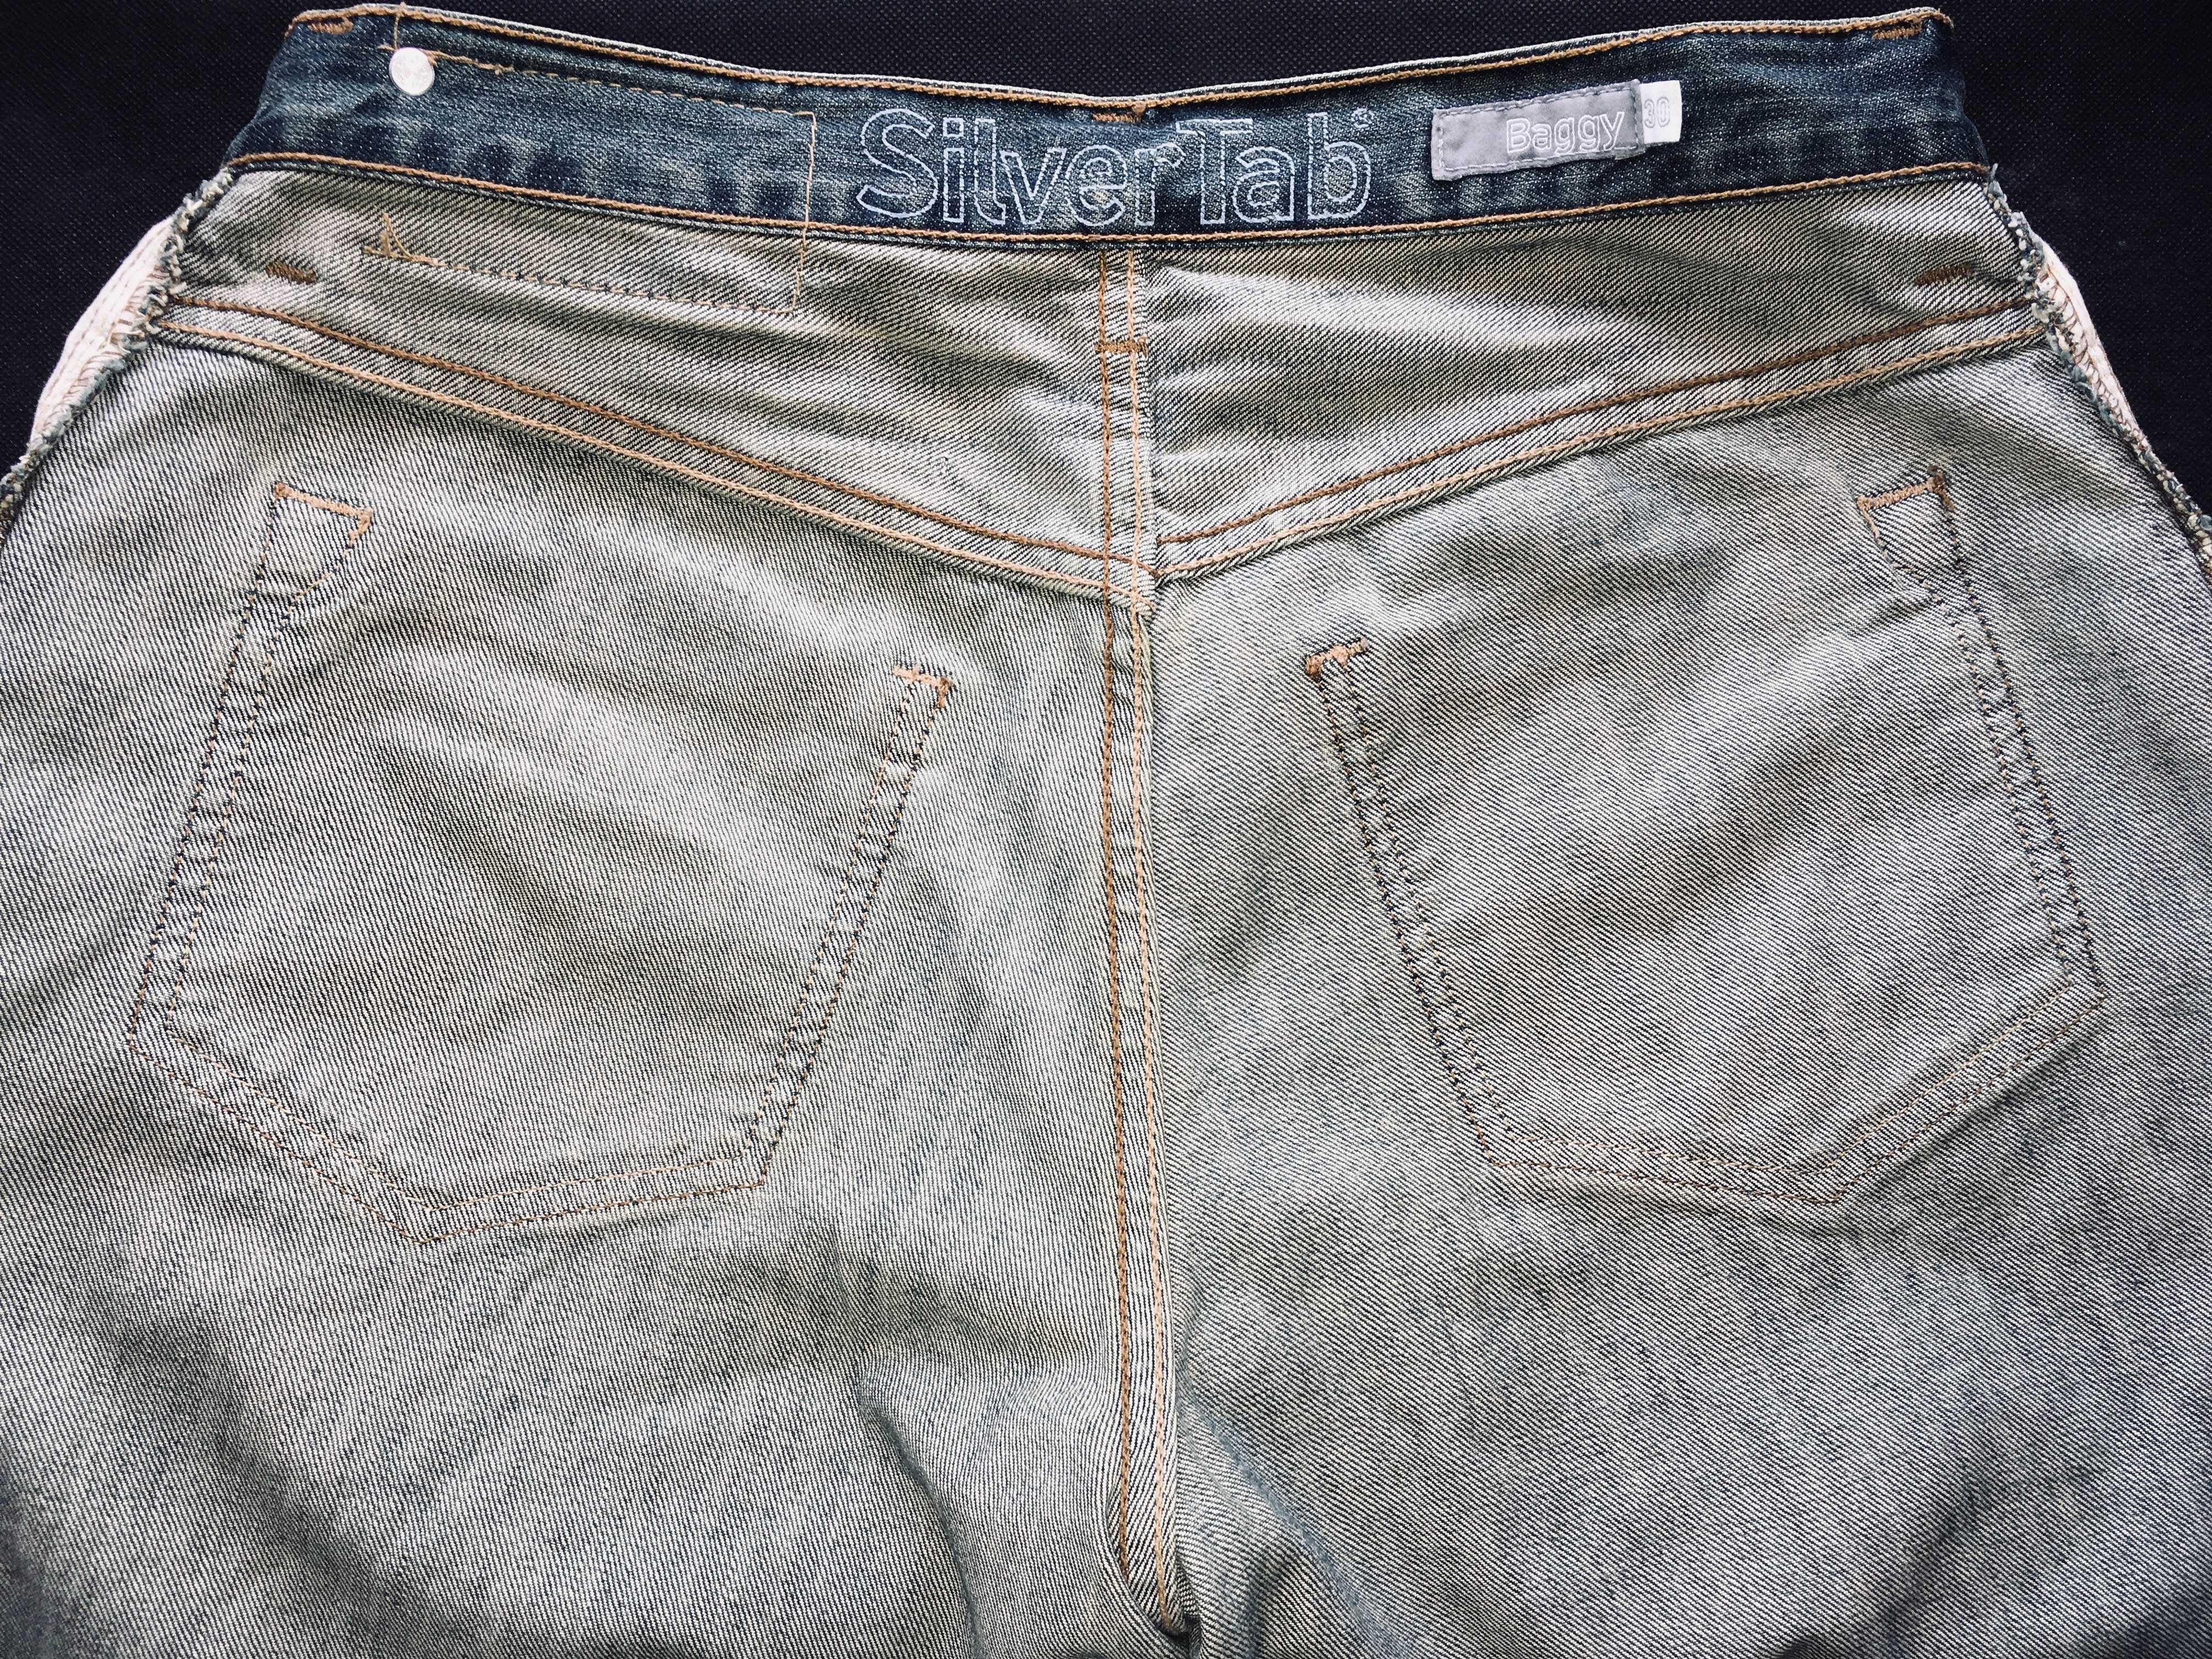 VINTAGE 2008 Made in Mexico LEVI'S® SilverTab™ BAGGY Jeans — W31⅓ L34